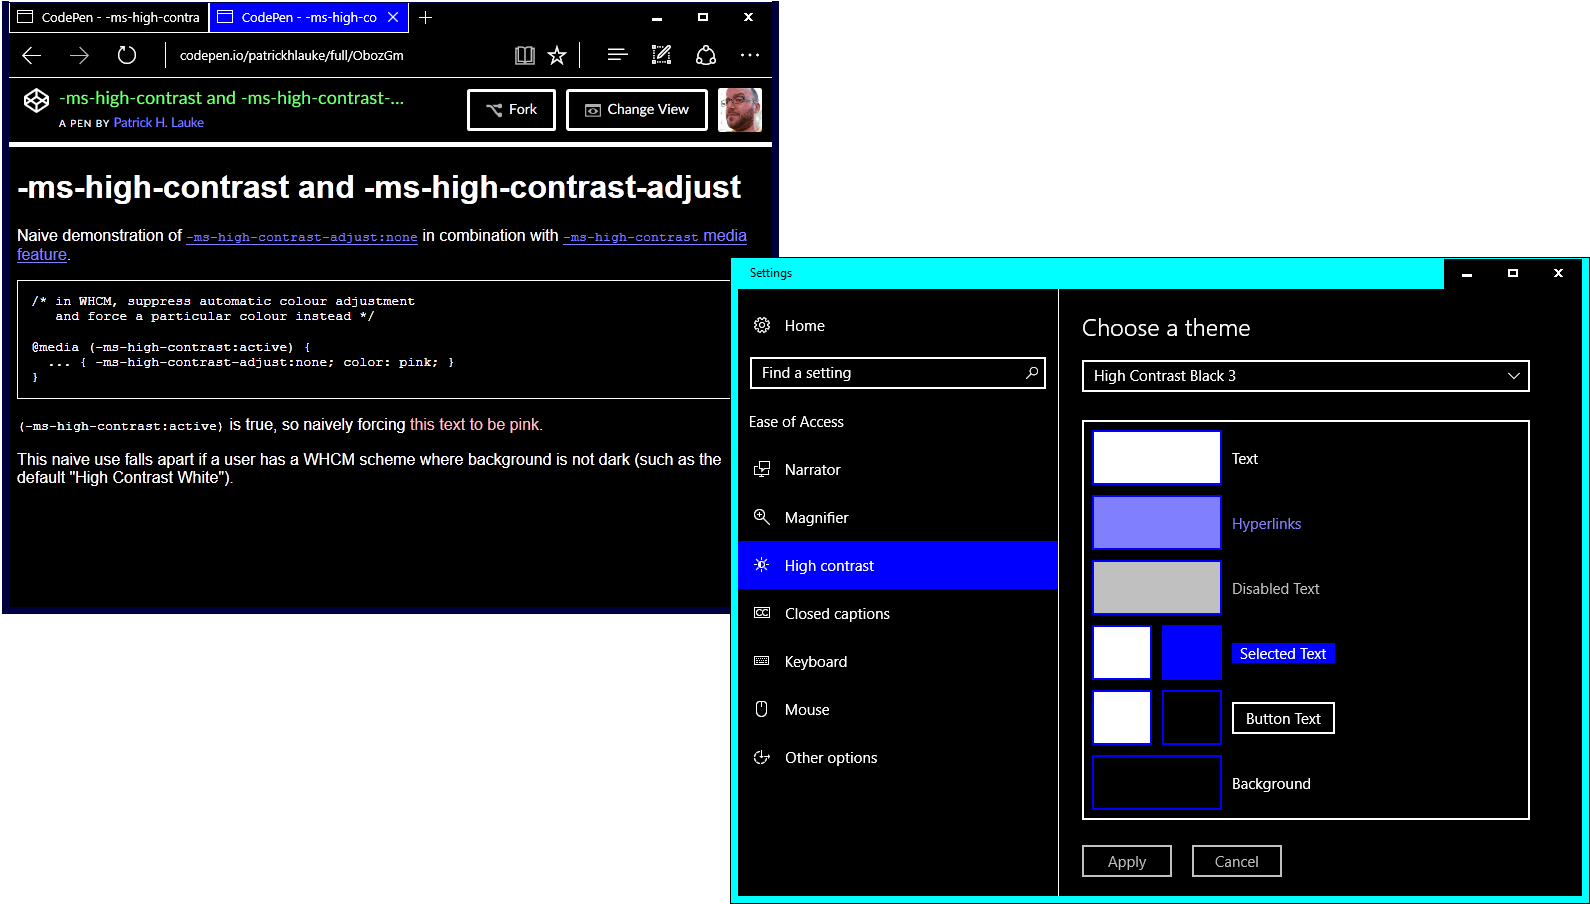 Screenshot of naive -ms-high-contrast-adjust example in Edge in a high contrast theme with a dark background